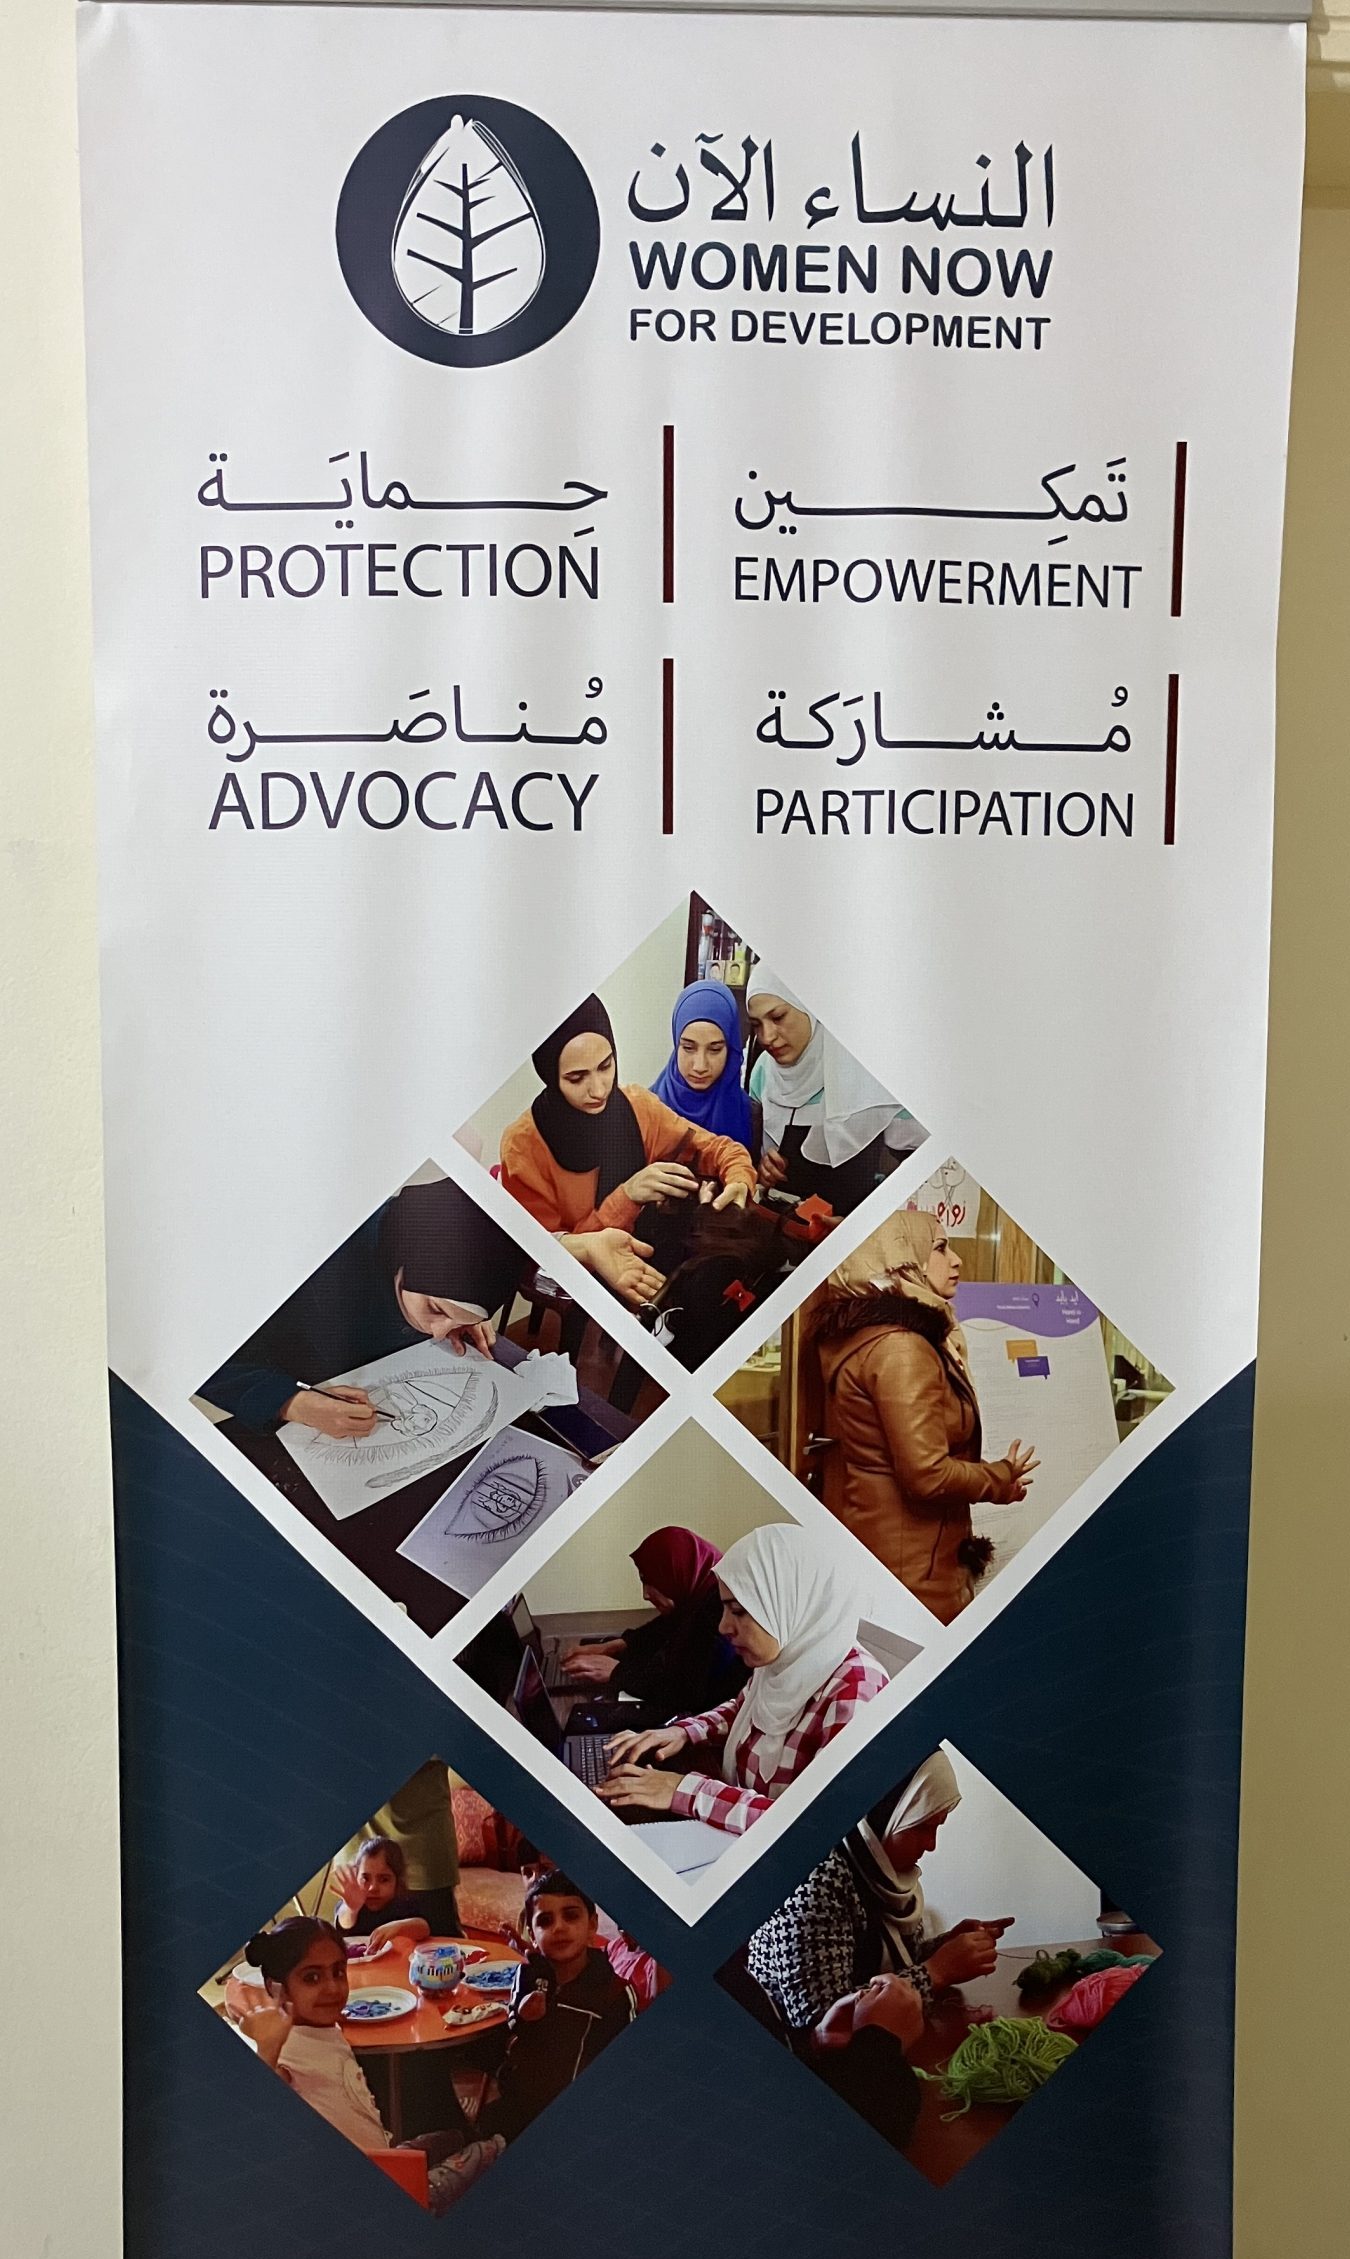 A pop-up banner with the words 'Women Now for Development' and images of Muslim women engaged in activities